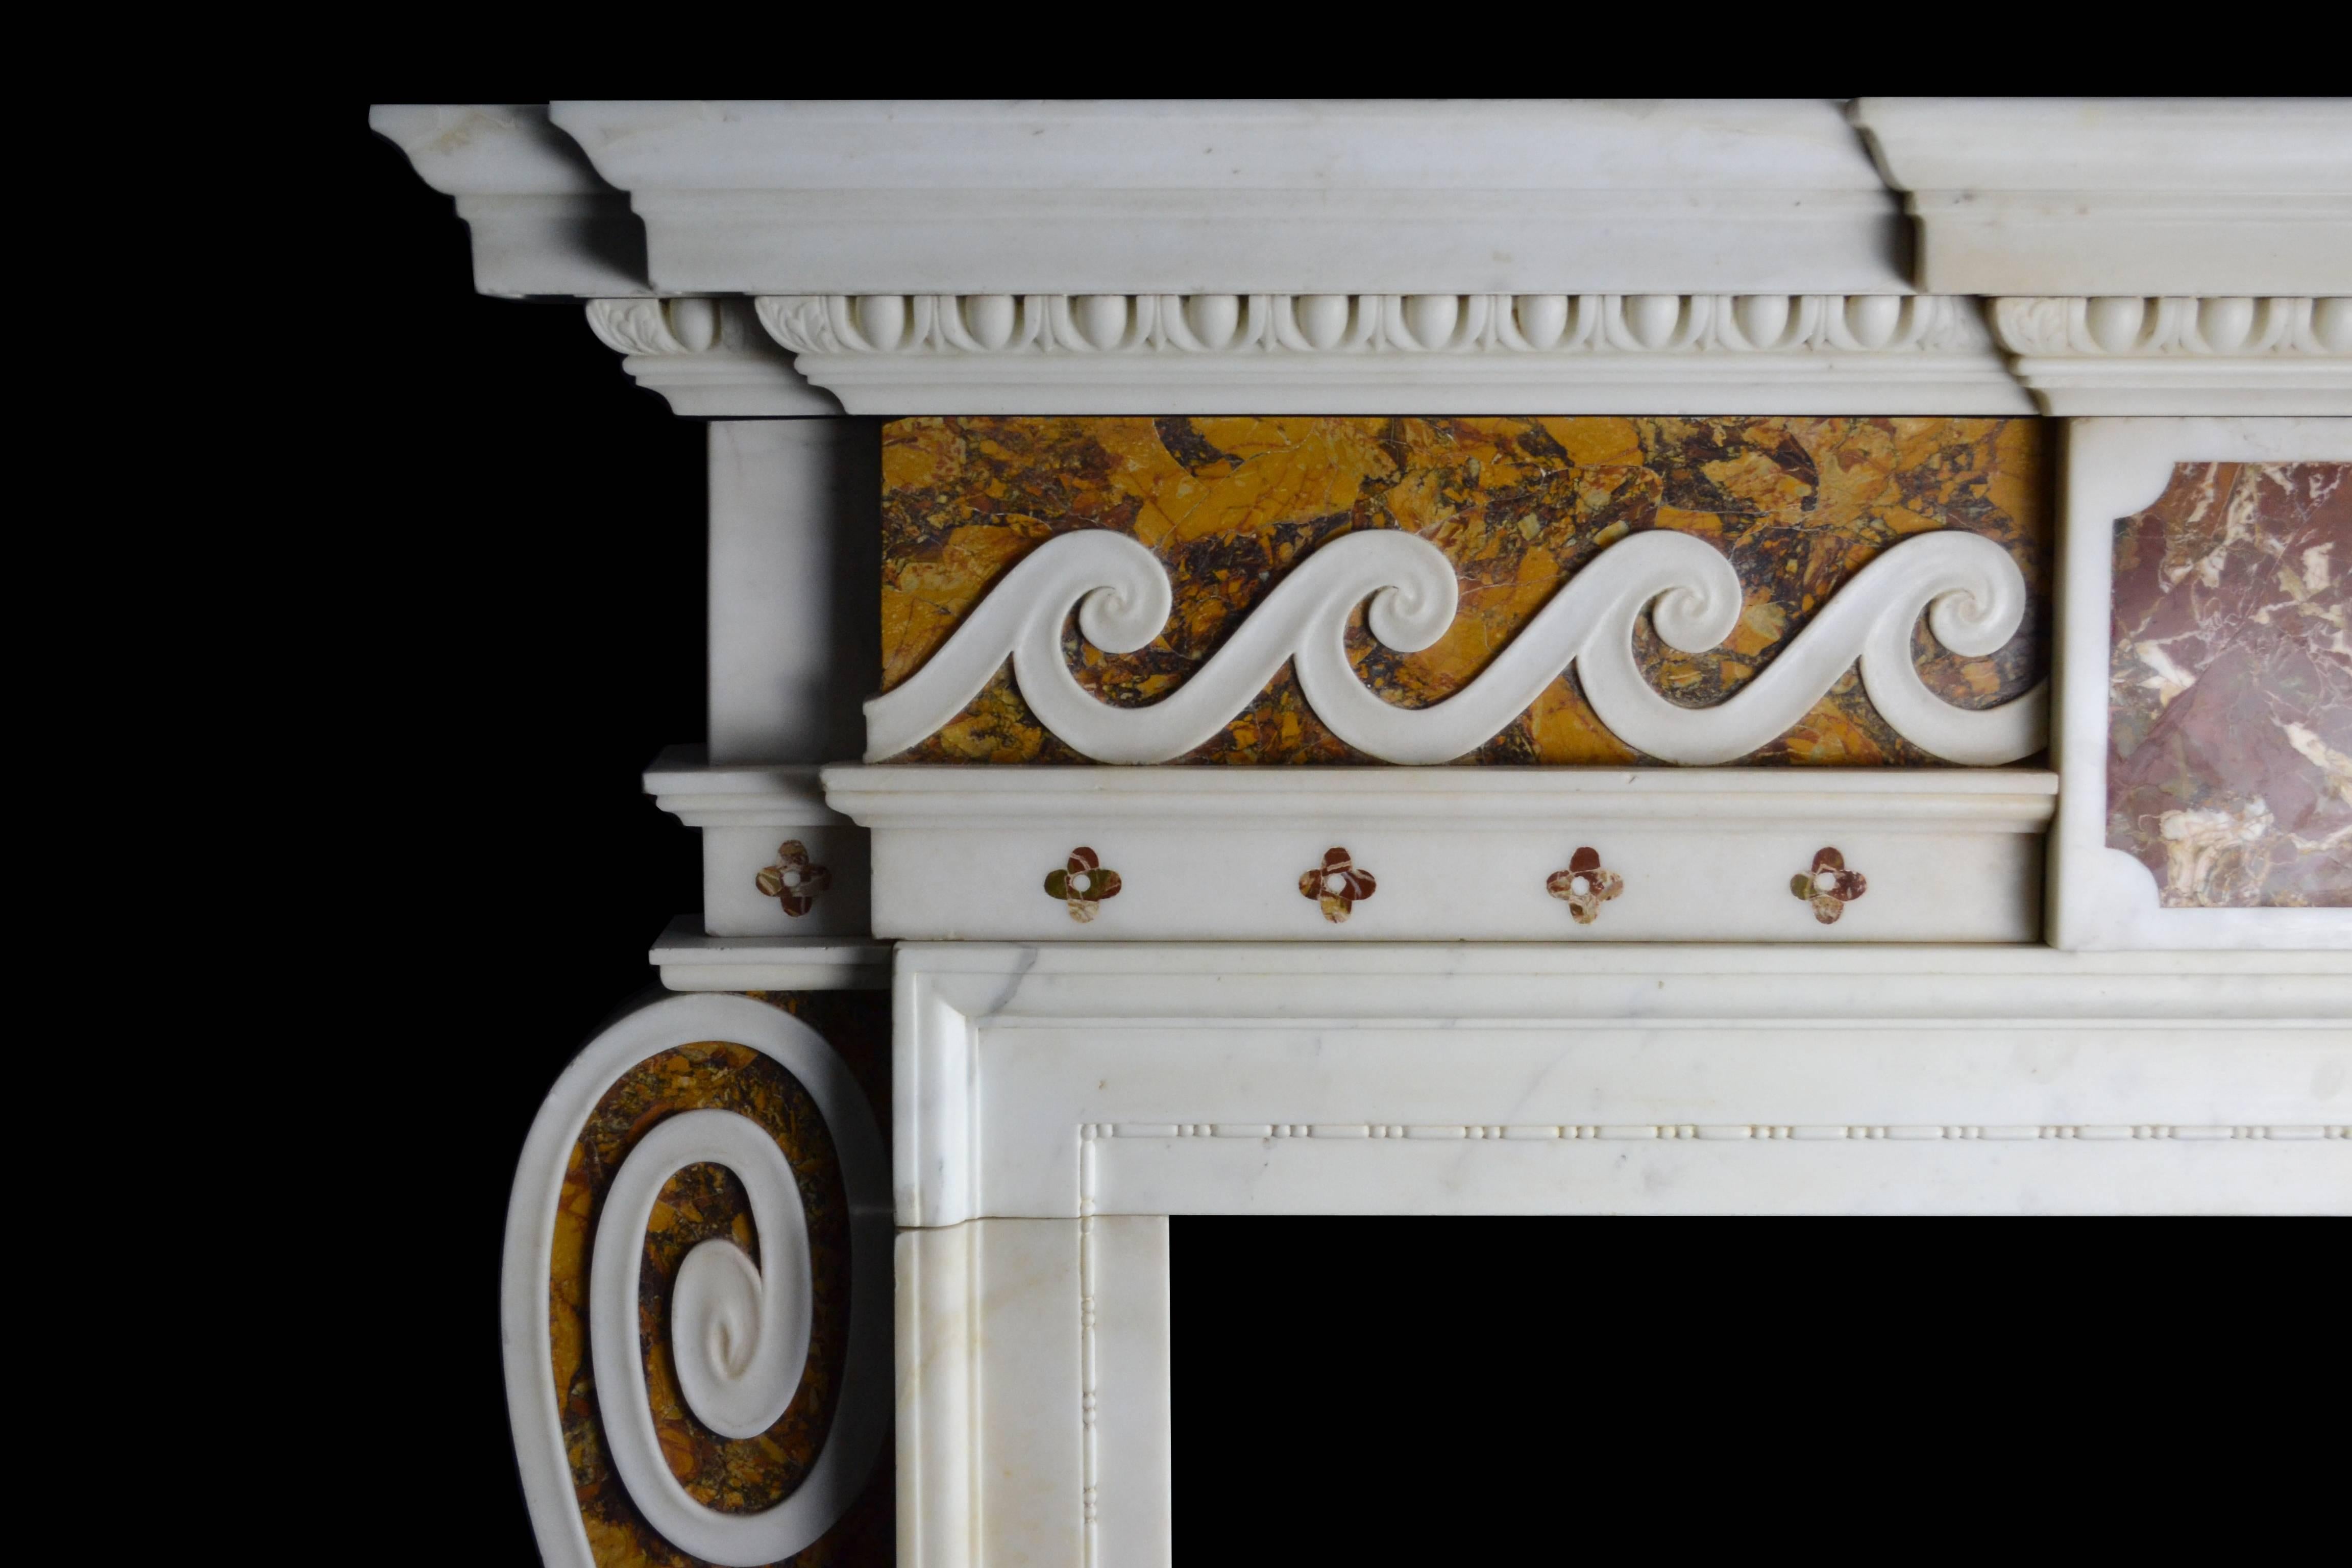 An important mid-18th century English mantelpiece of strong architectural form, with many hallmarks of the work of Sir Henry Cheere. In Statuary, Convent Siena and Sicilian Jasper marbles, with side facing consoles to the jambs, abutting inground